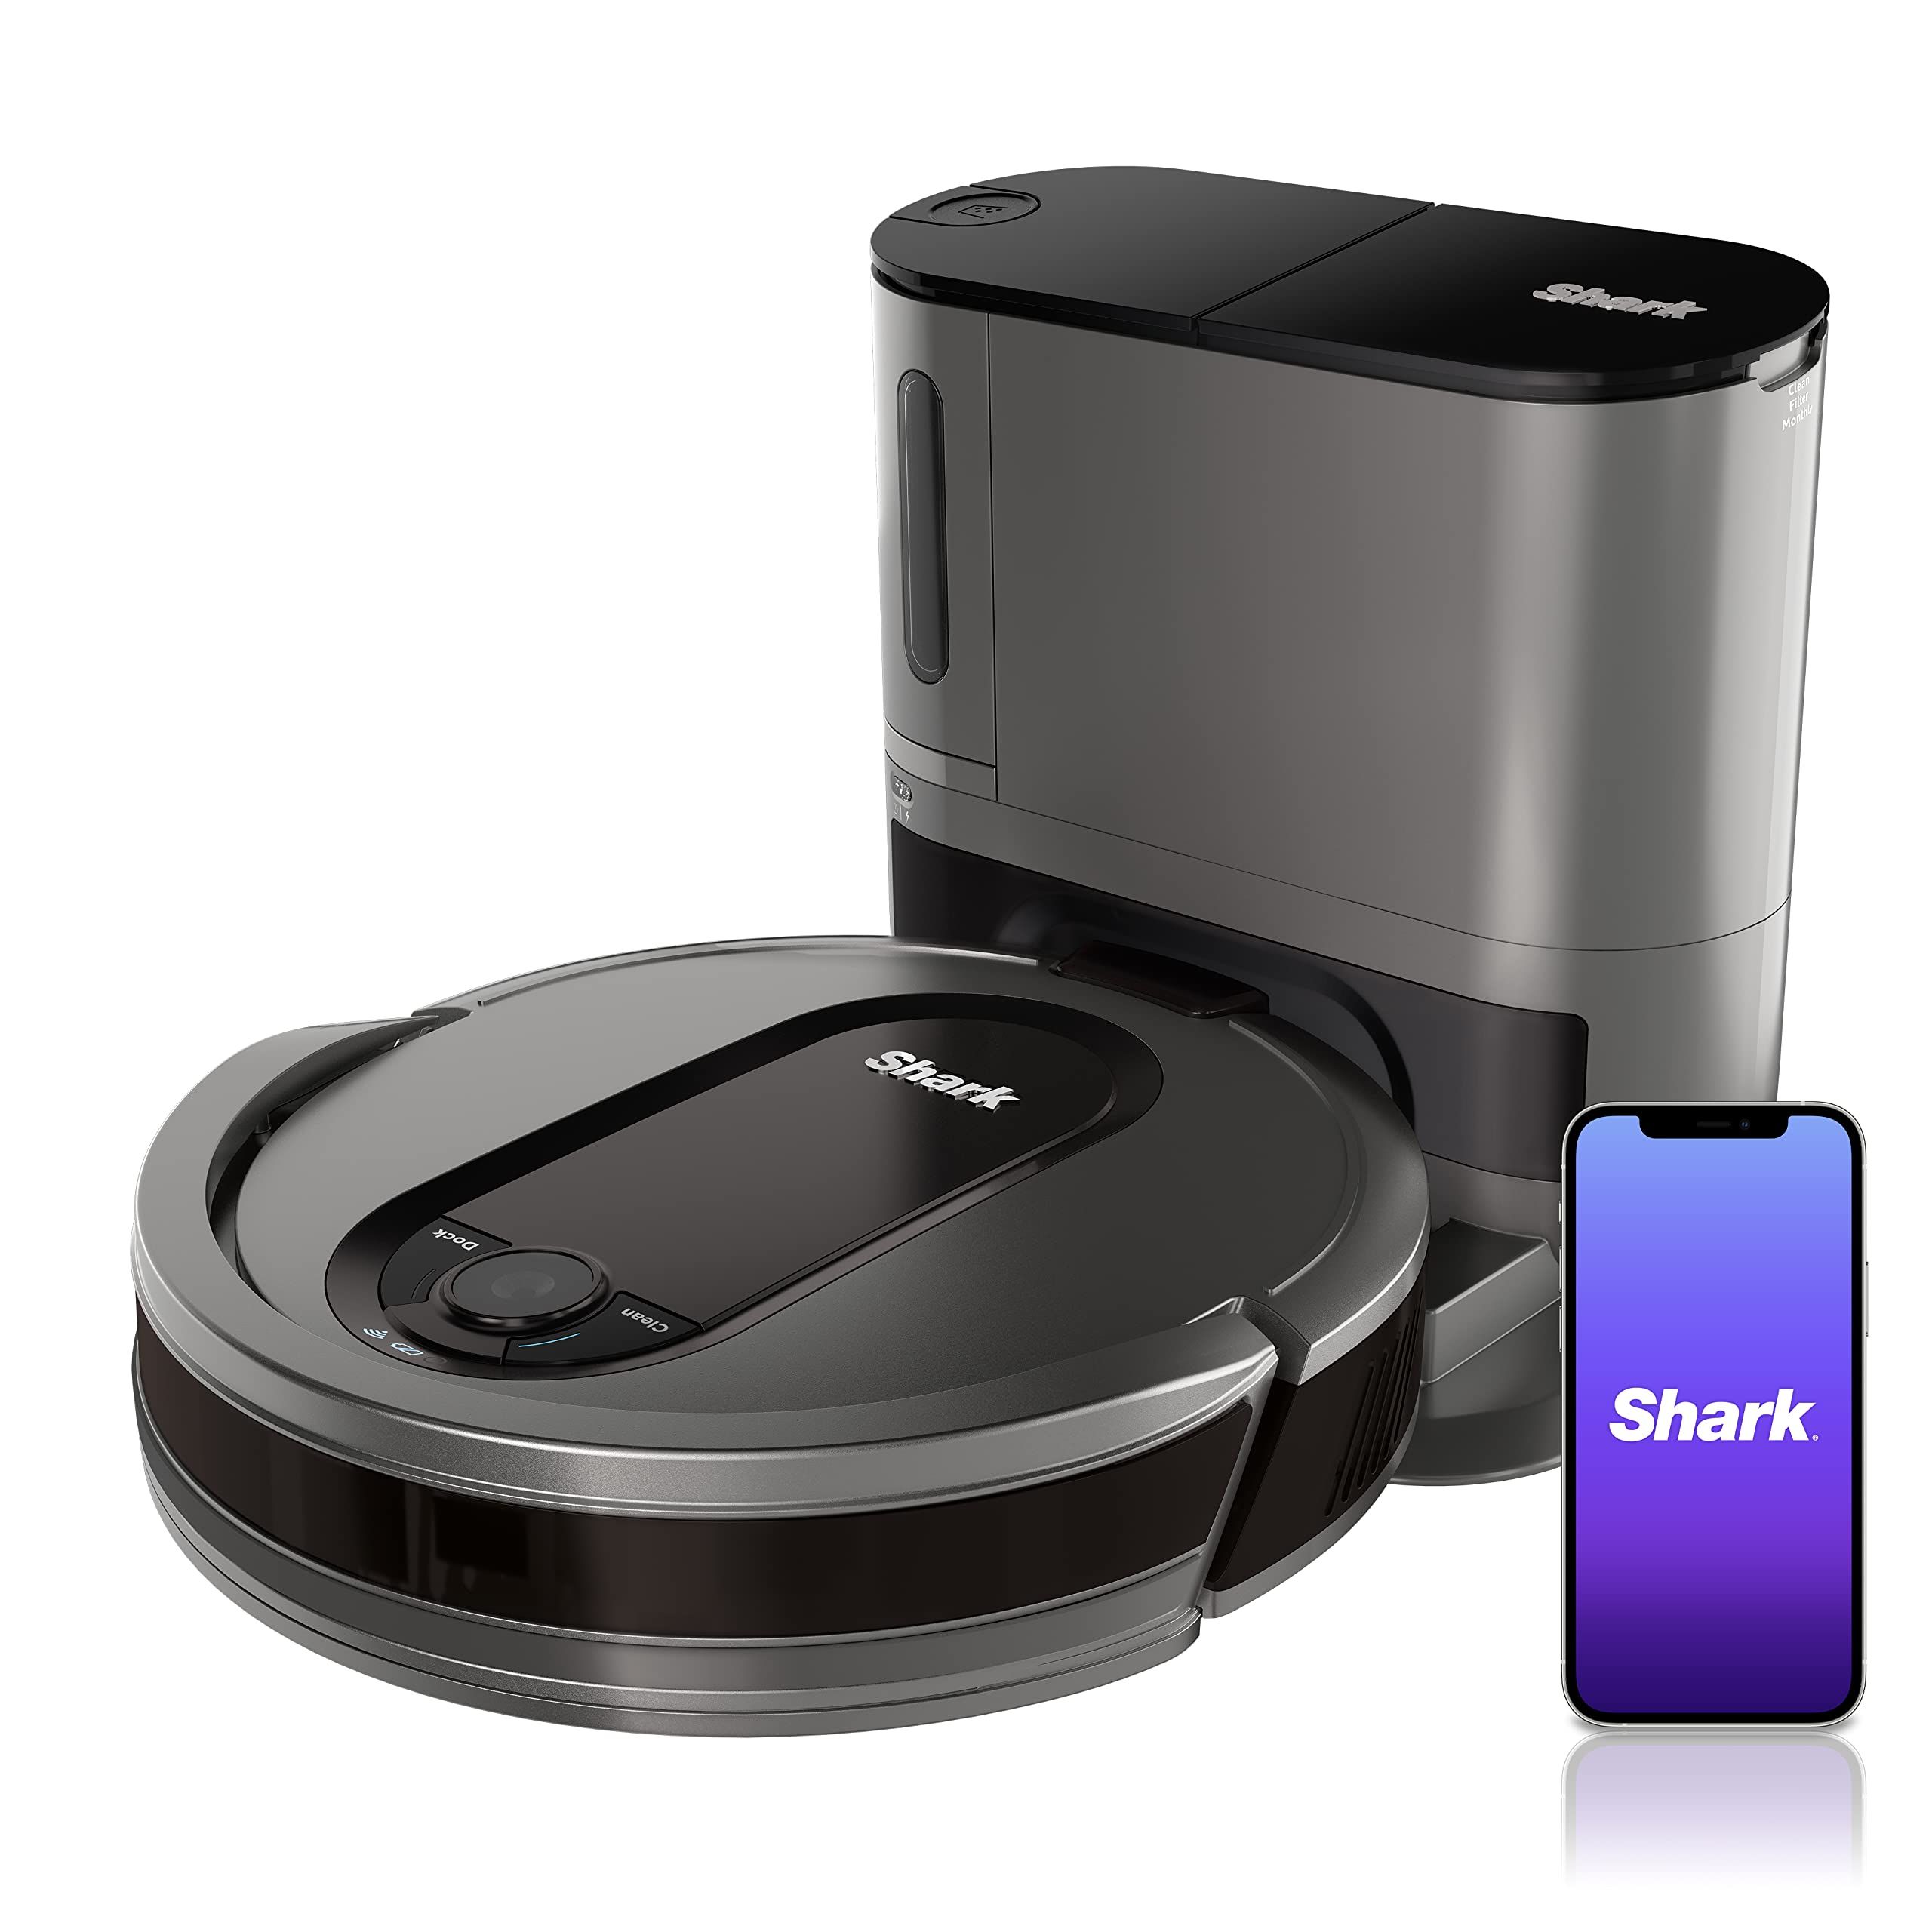 Shark AV911S EZ Robot Vacuum with Self-Empty Base, Bagless, Row-by-Row Cleaning, Perfect for Pet ... | Amazon (US)